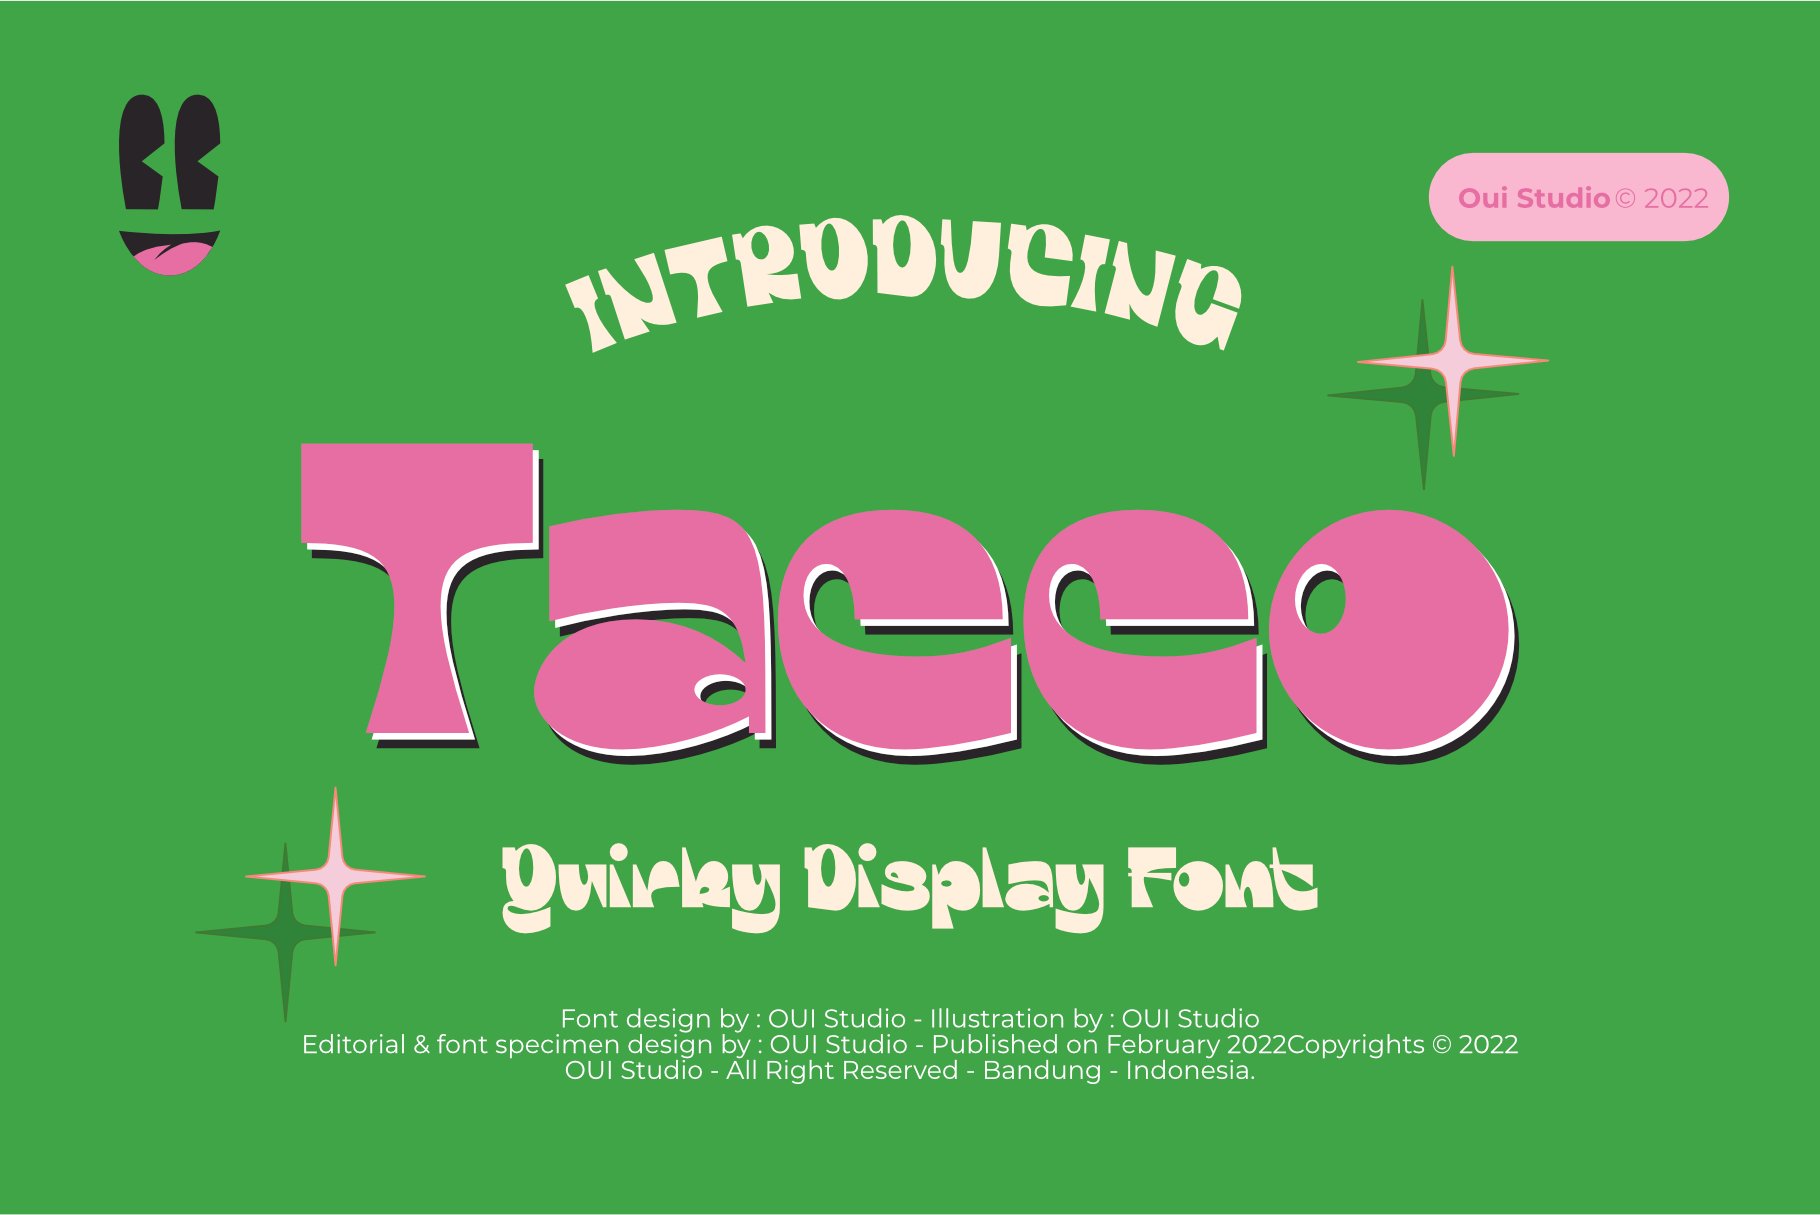 Intro Offer 50% Tacco Font cover image.